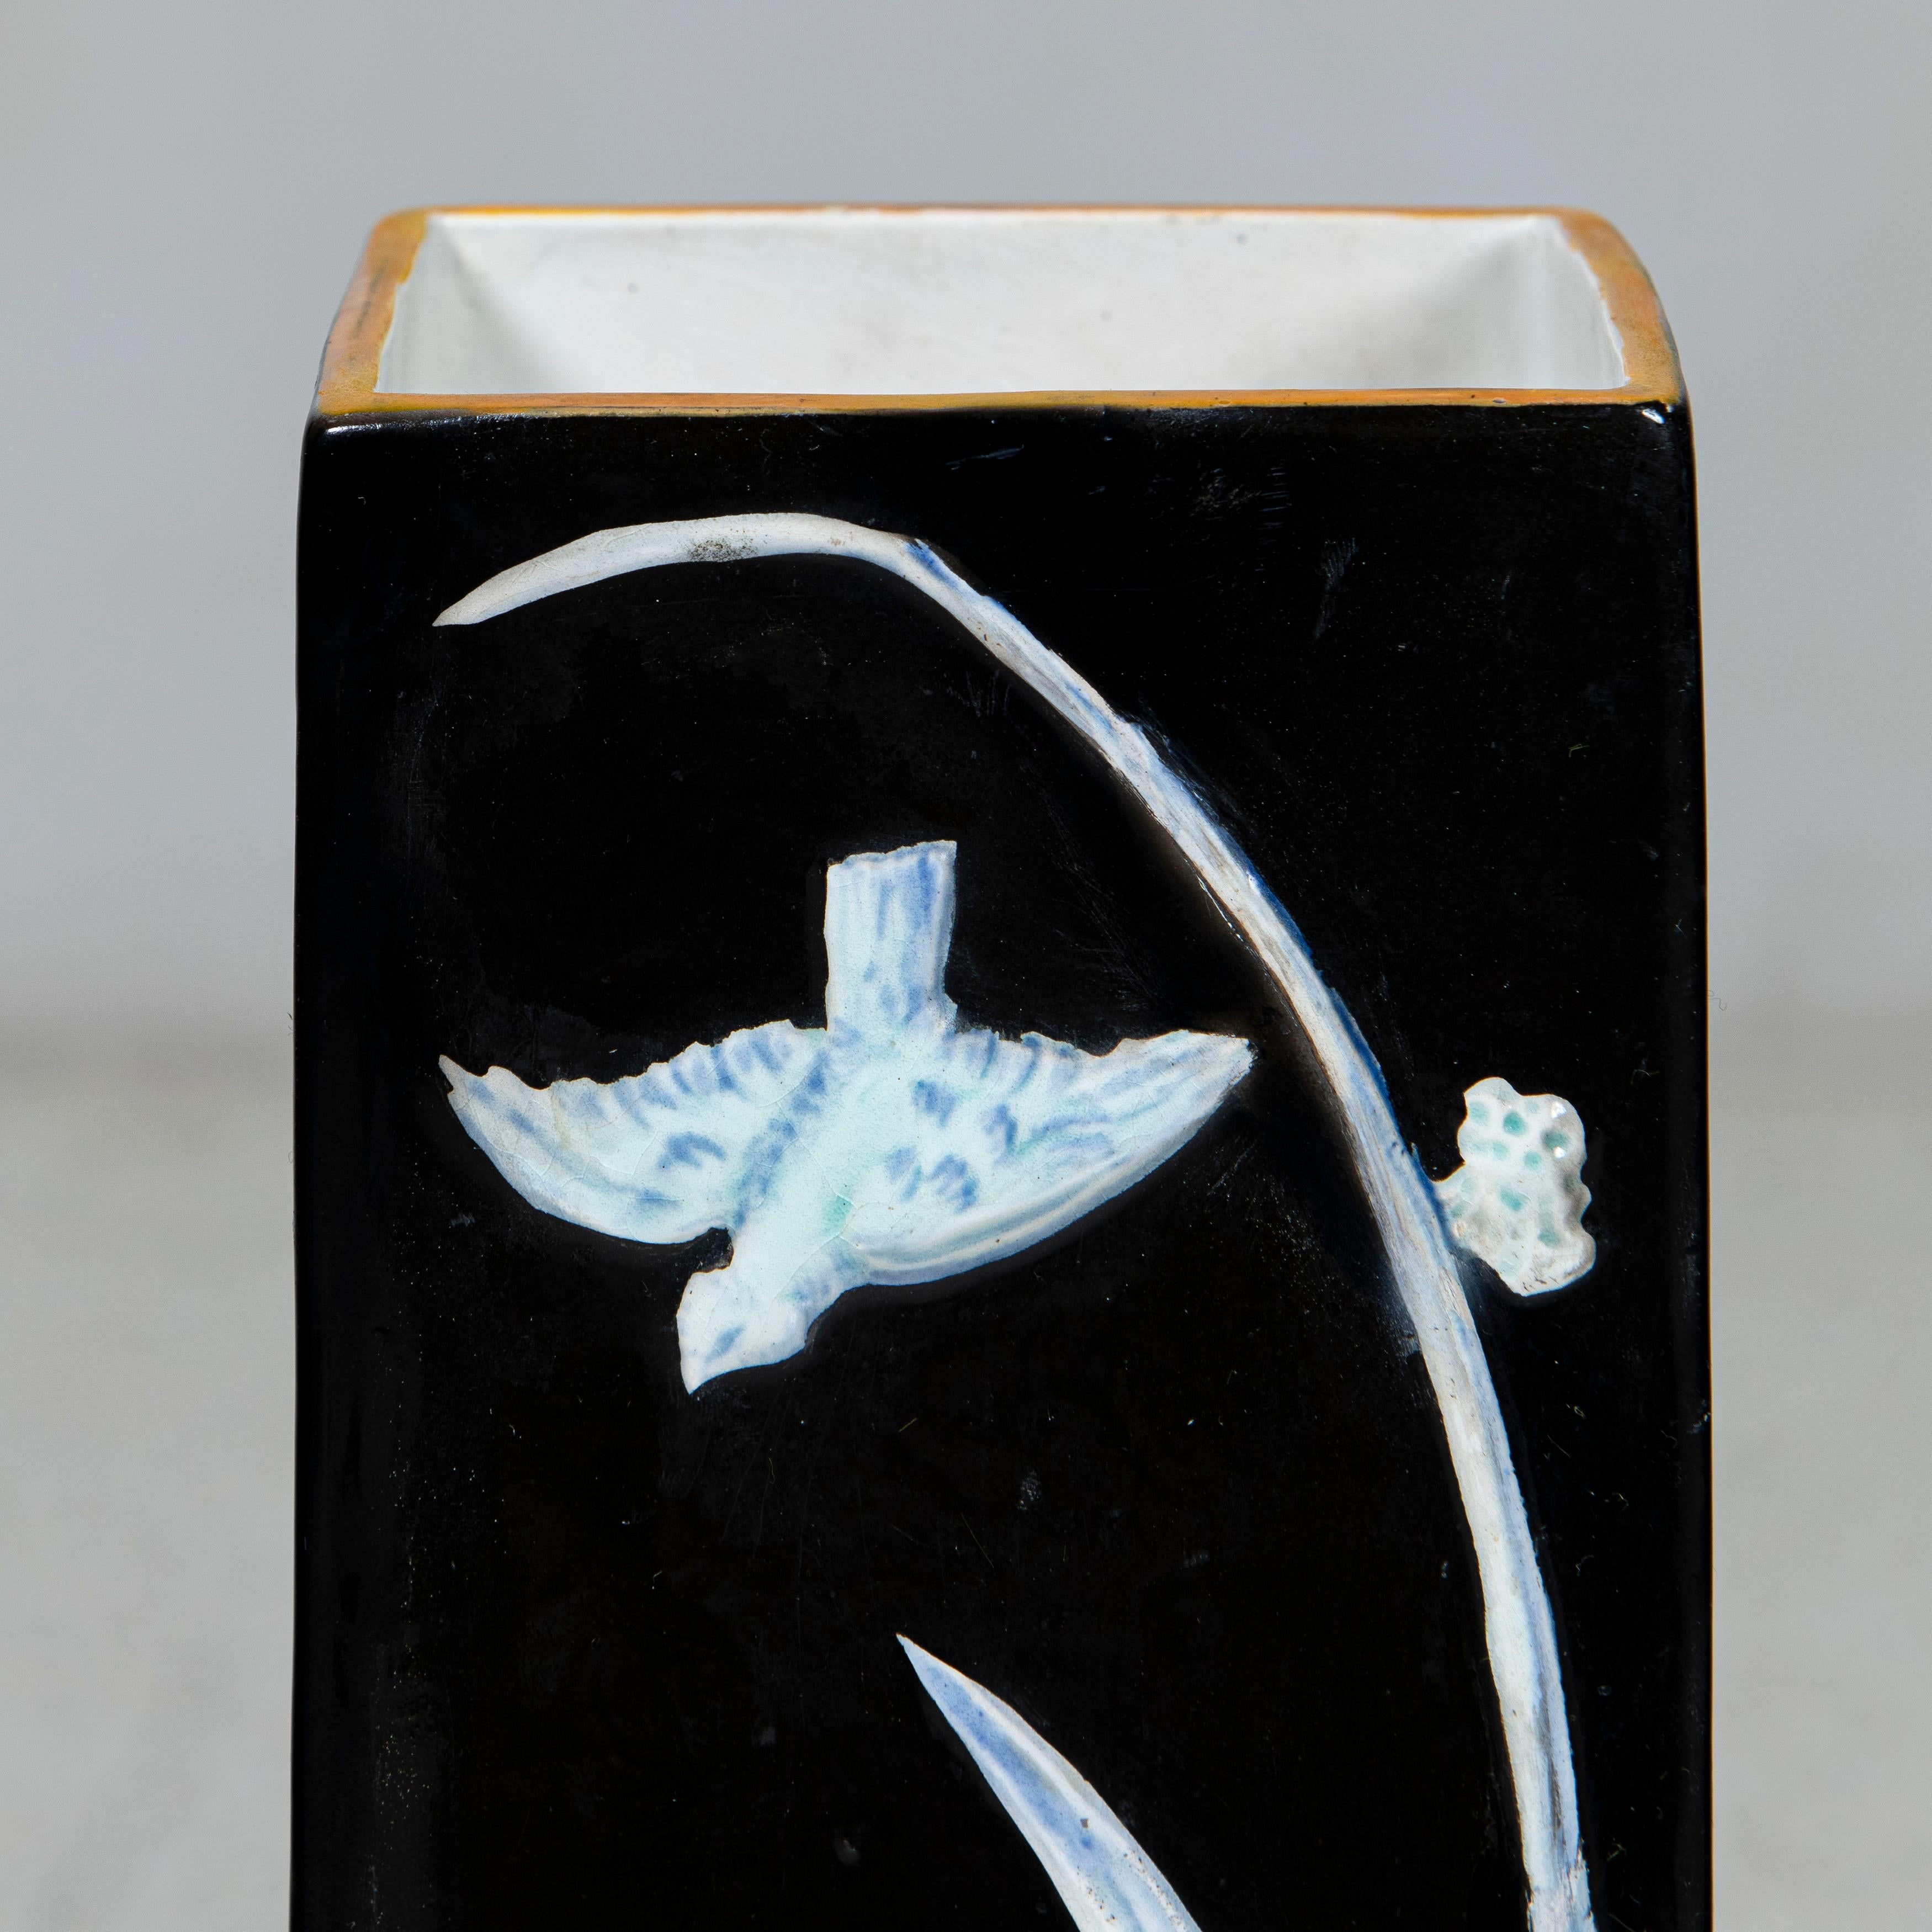 20th Century Pair of Ceramic Sarreguemines Vases with Floral and Heron Design, France, 1900 For Sale